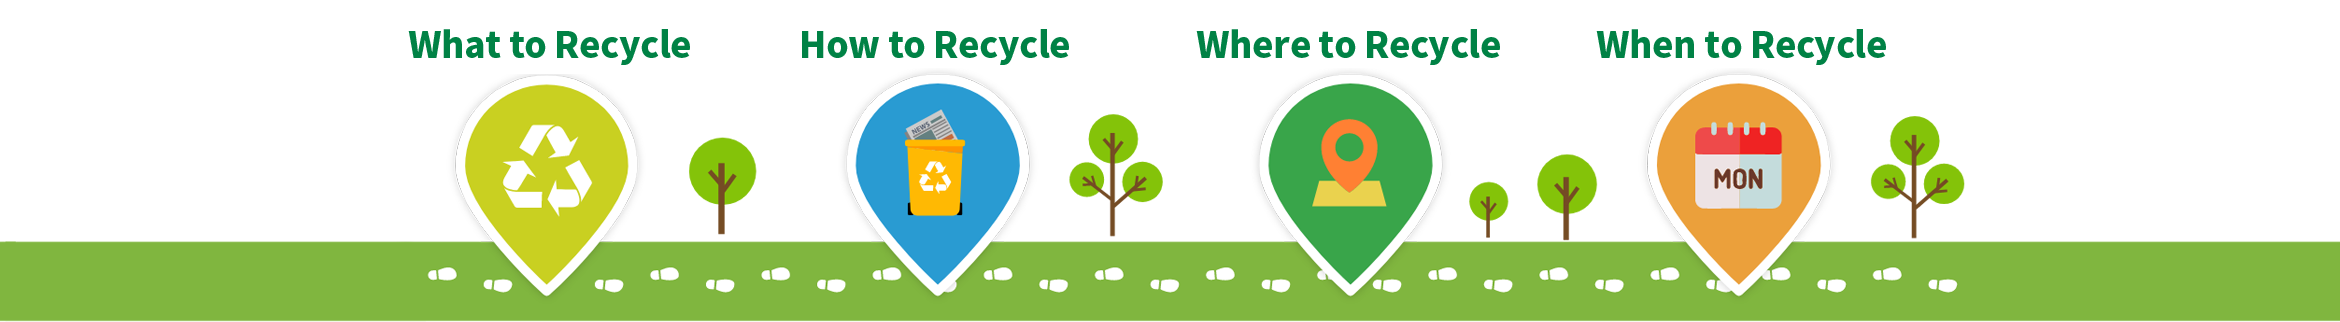 Home Recycling One Stop Shop Journey | What to Recycle| How to Recycle| Where to Recycle| When to Recycle